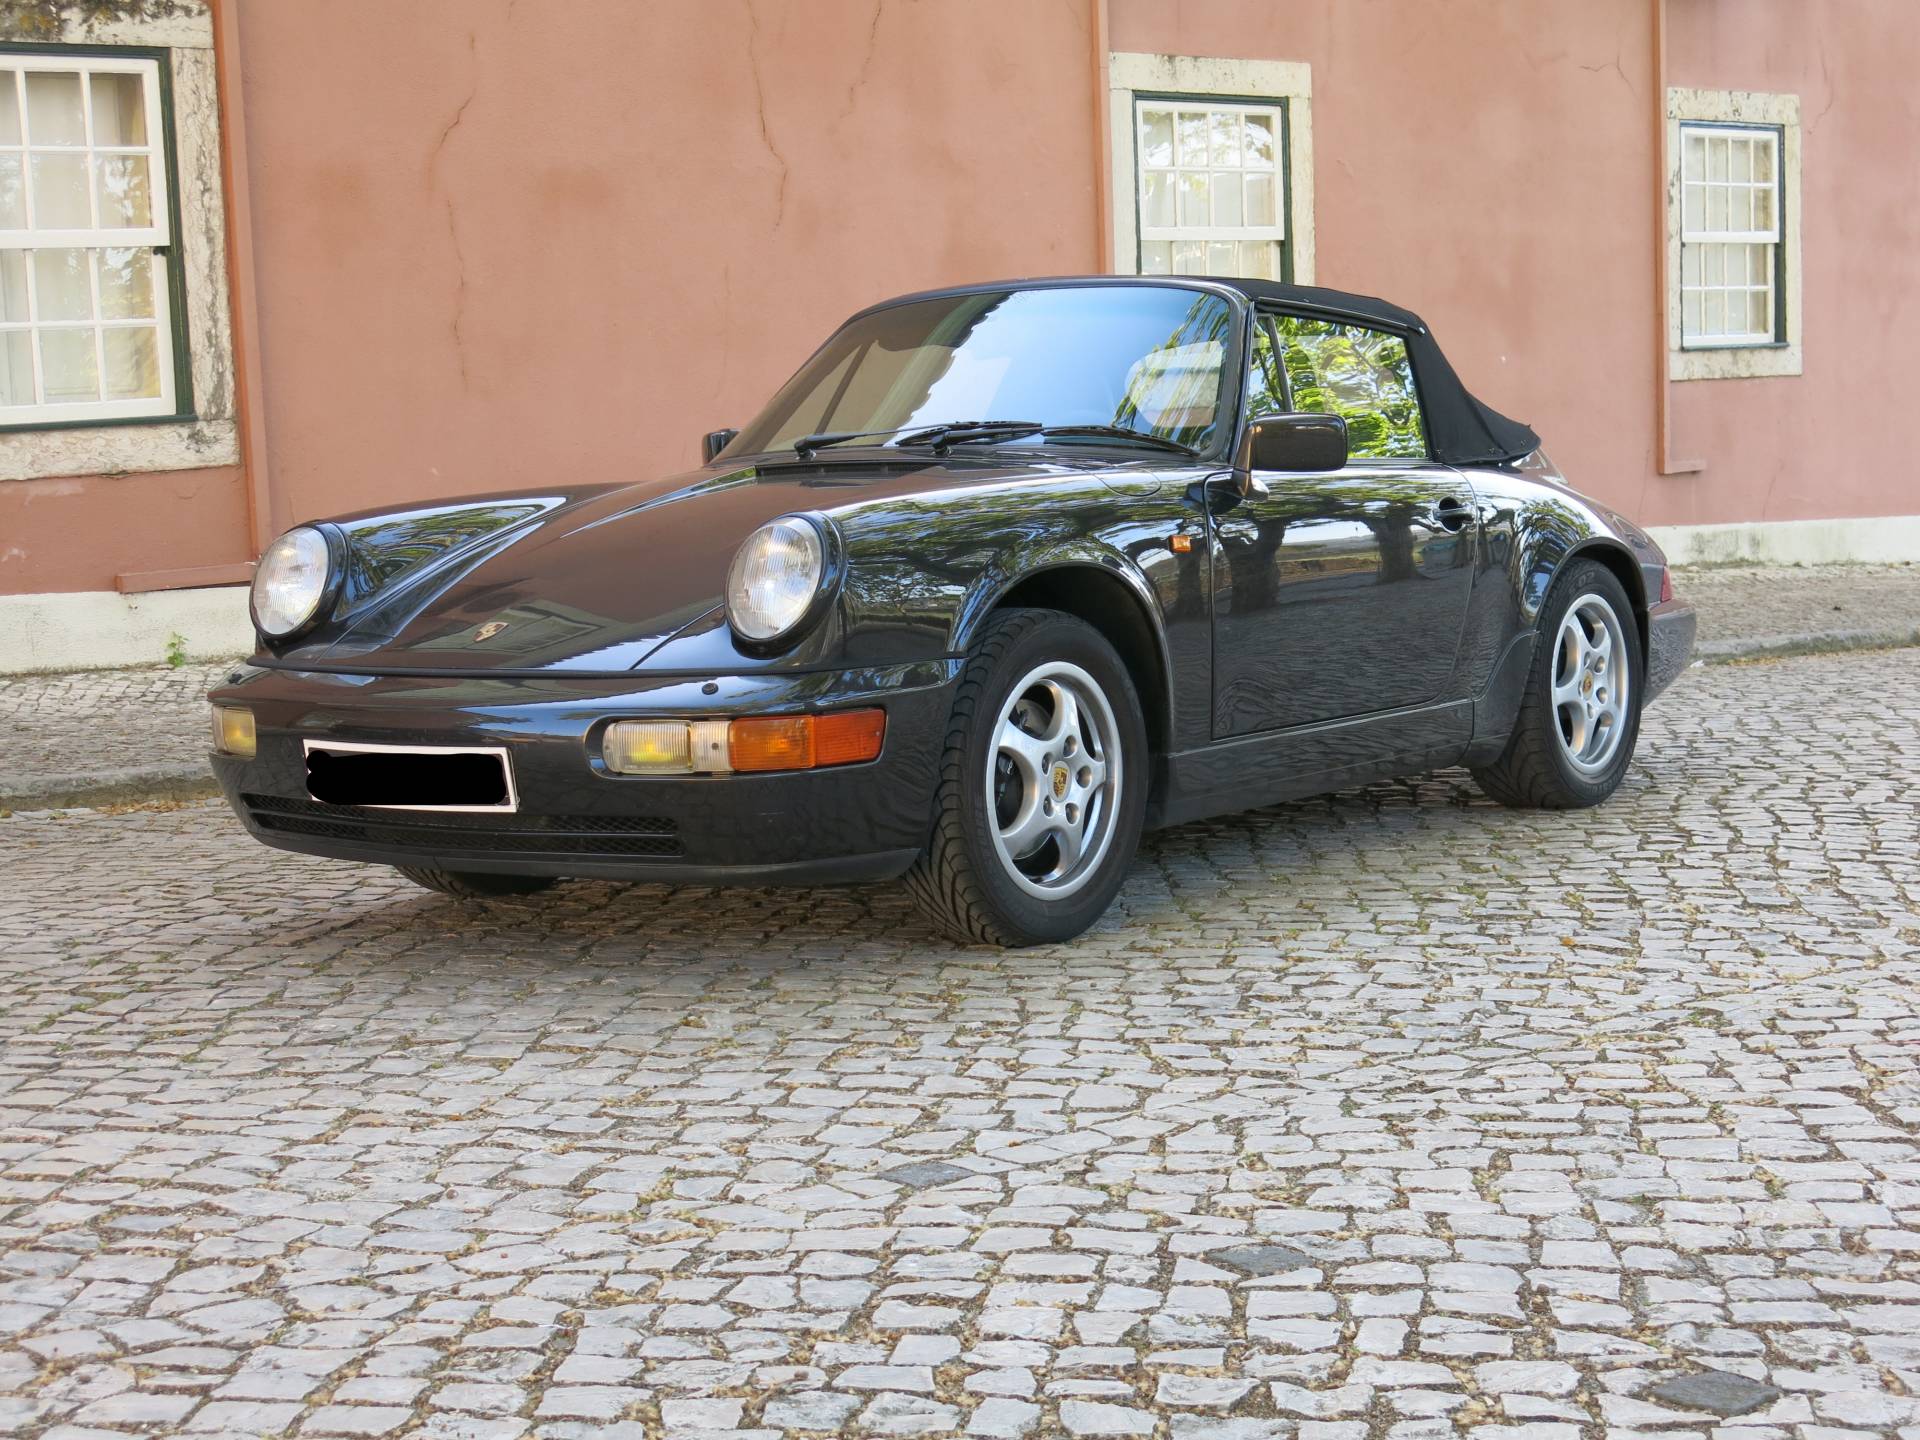 For Sale: Porsche 911 Carrera 4 (1990) offered for GBP 60,487